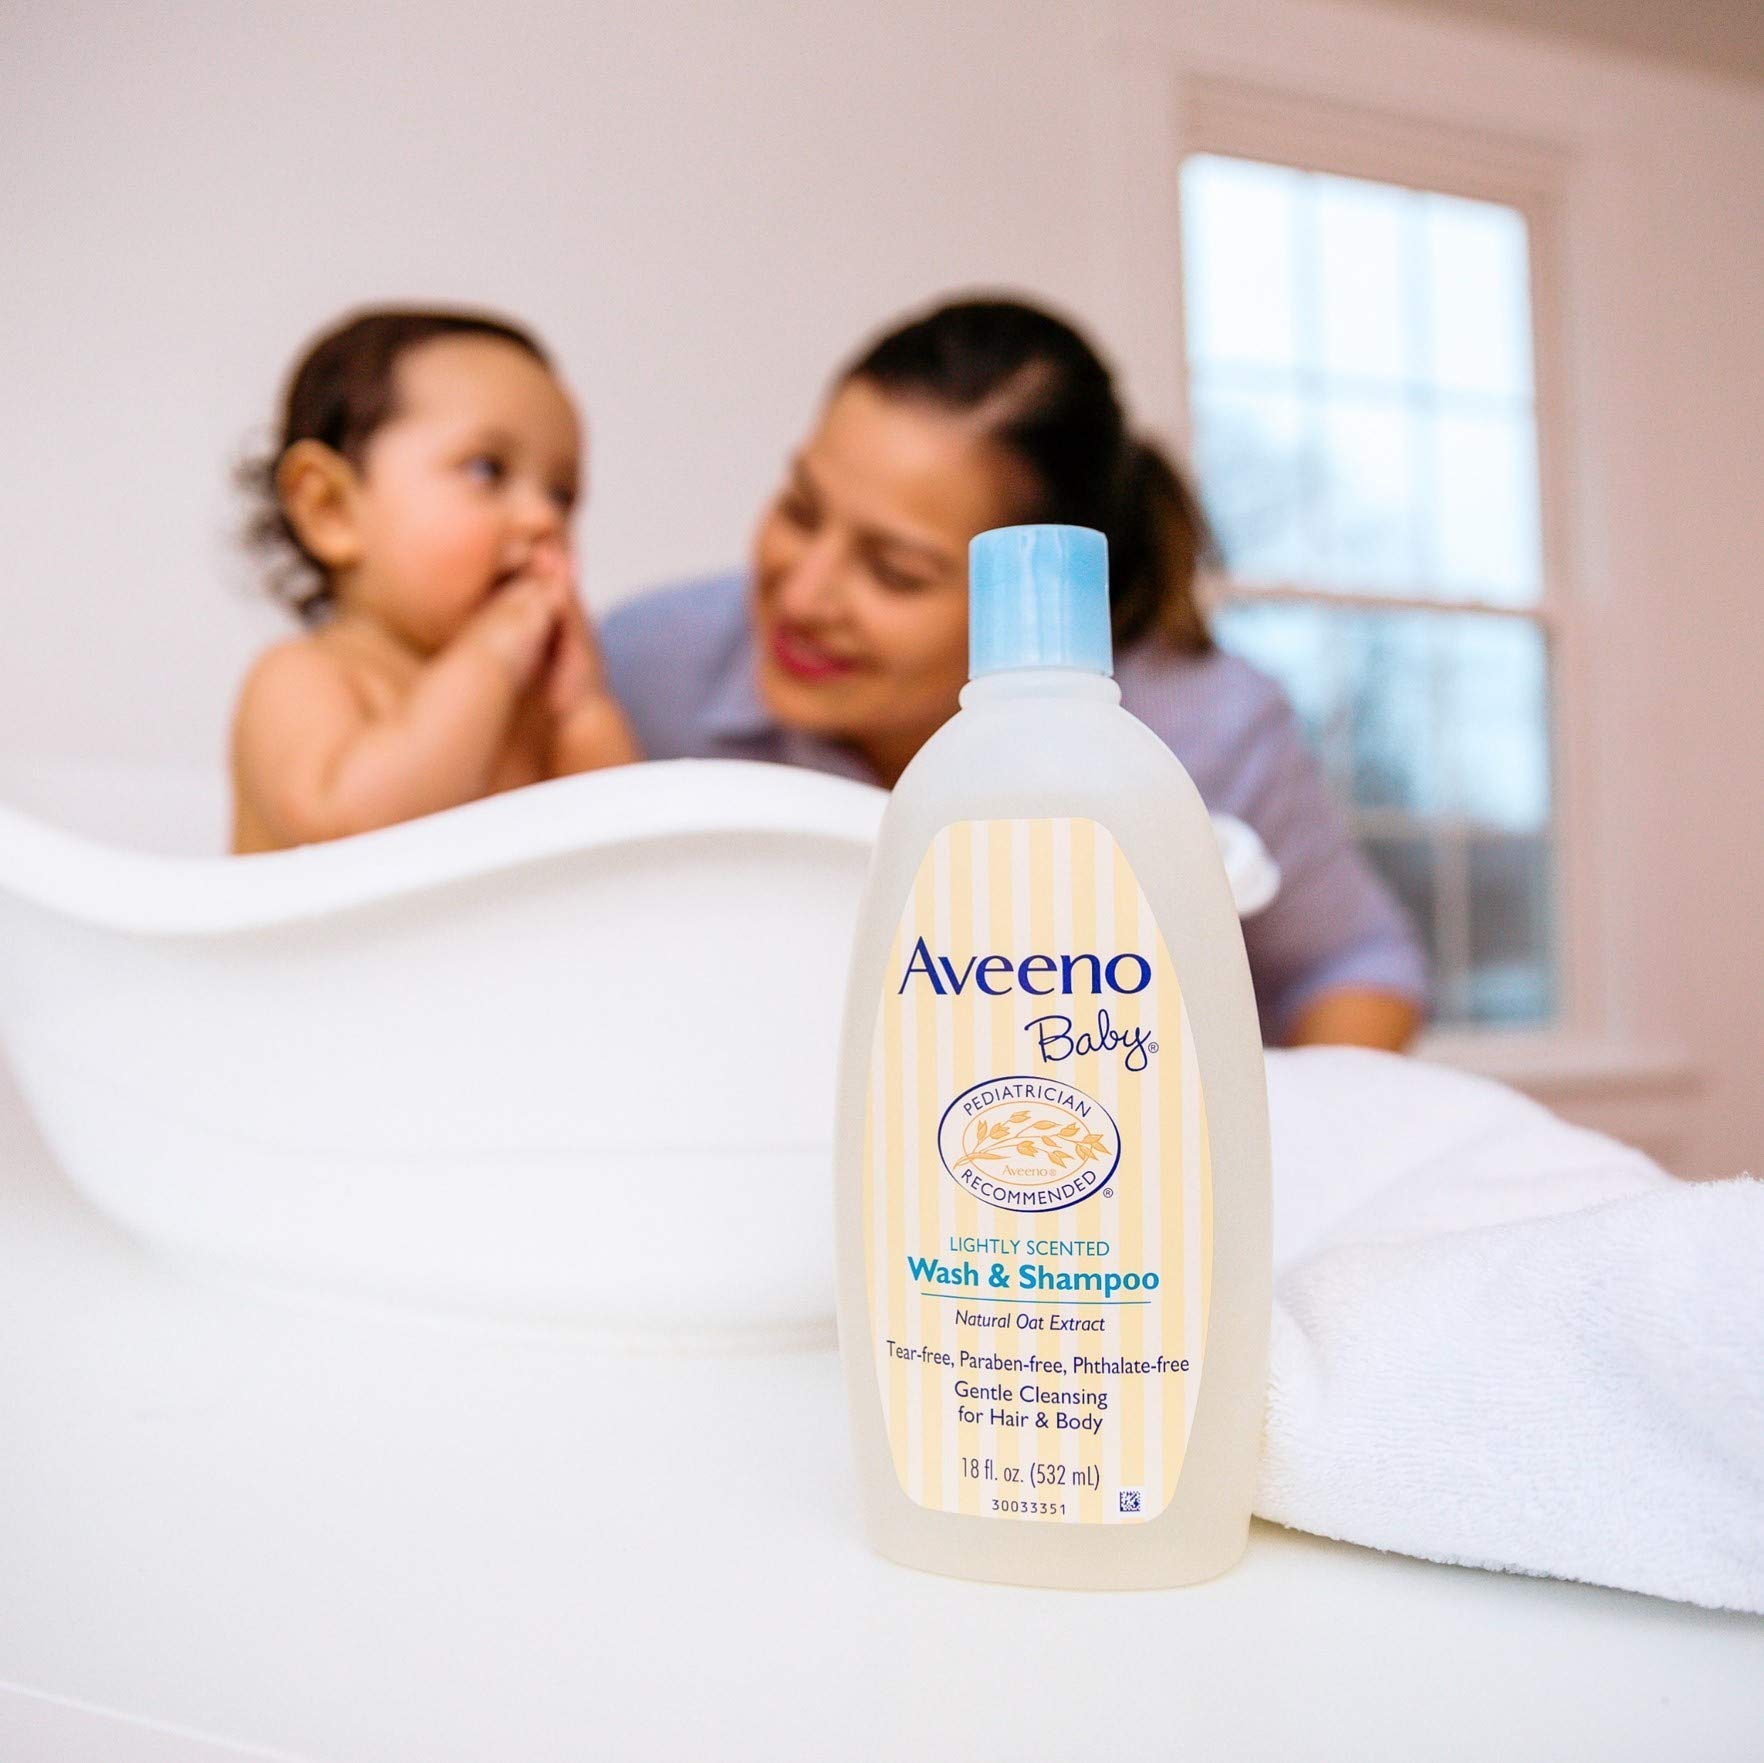 Aveeno Baby Gentle Wash & Shampoo with Natural Oat Extract, Tear-Free, 18 fl. oz, Twin Pack